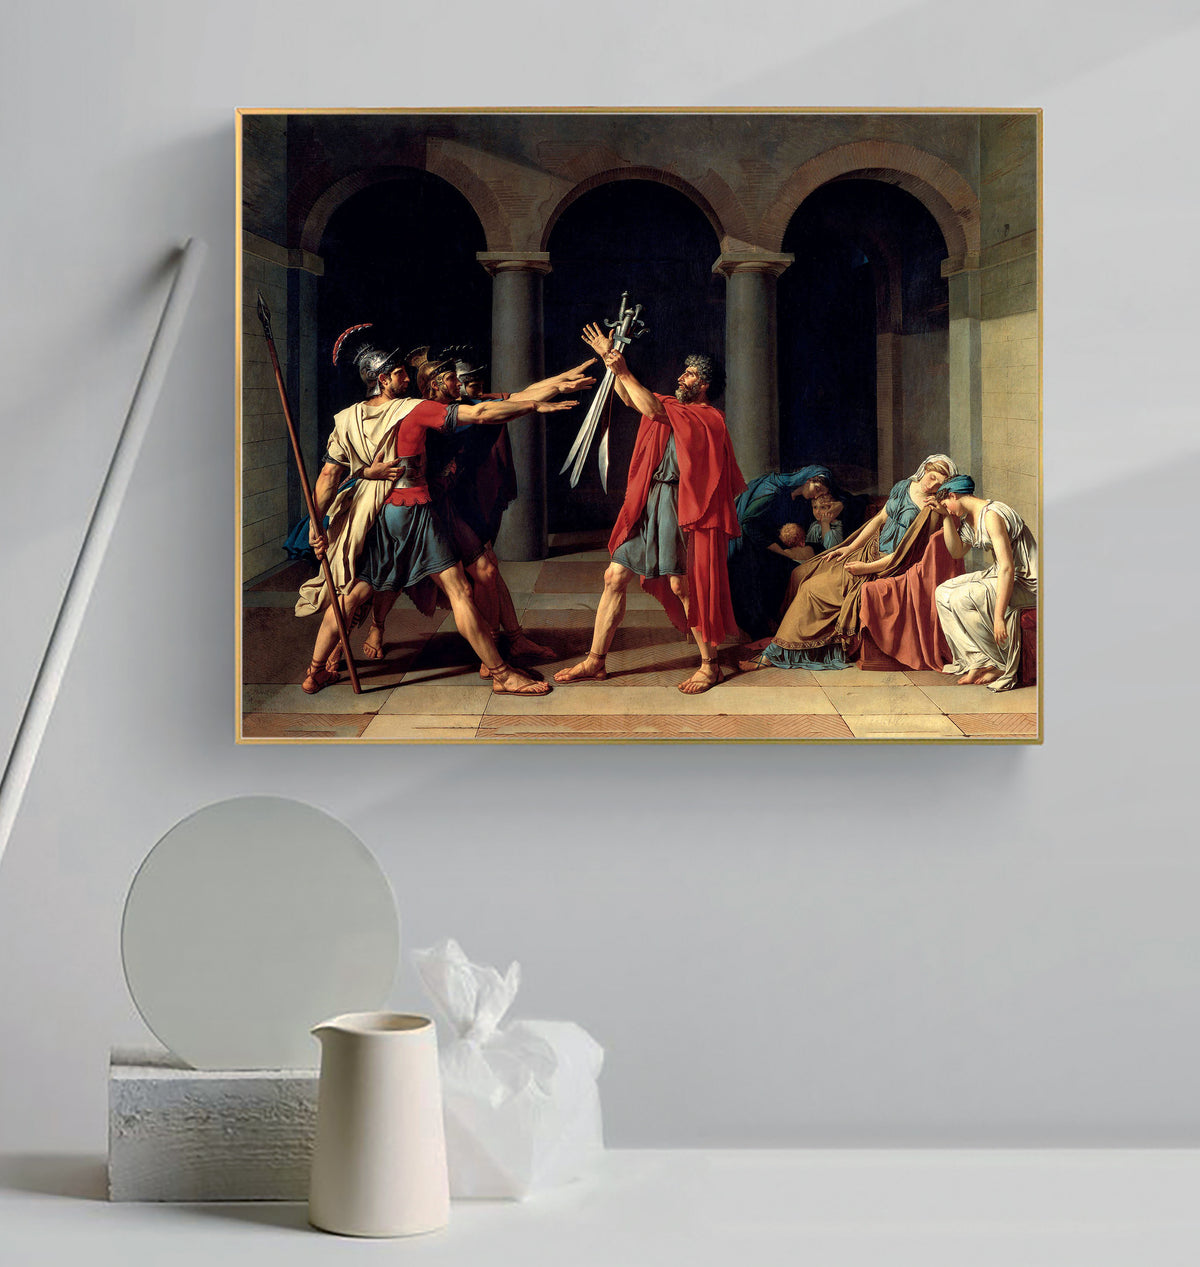 The Oath of Horatii by Jacques-Louis David